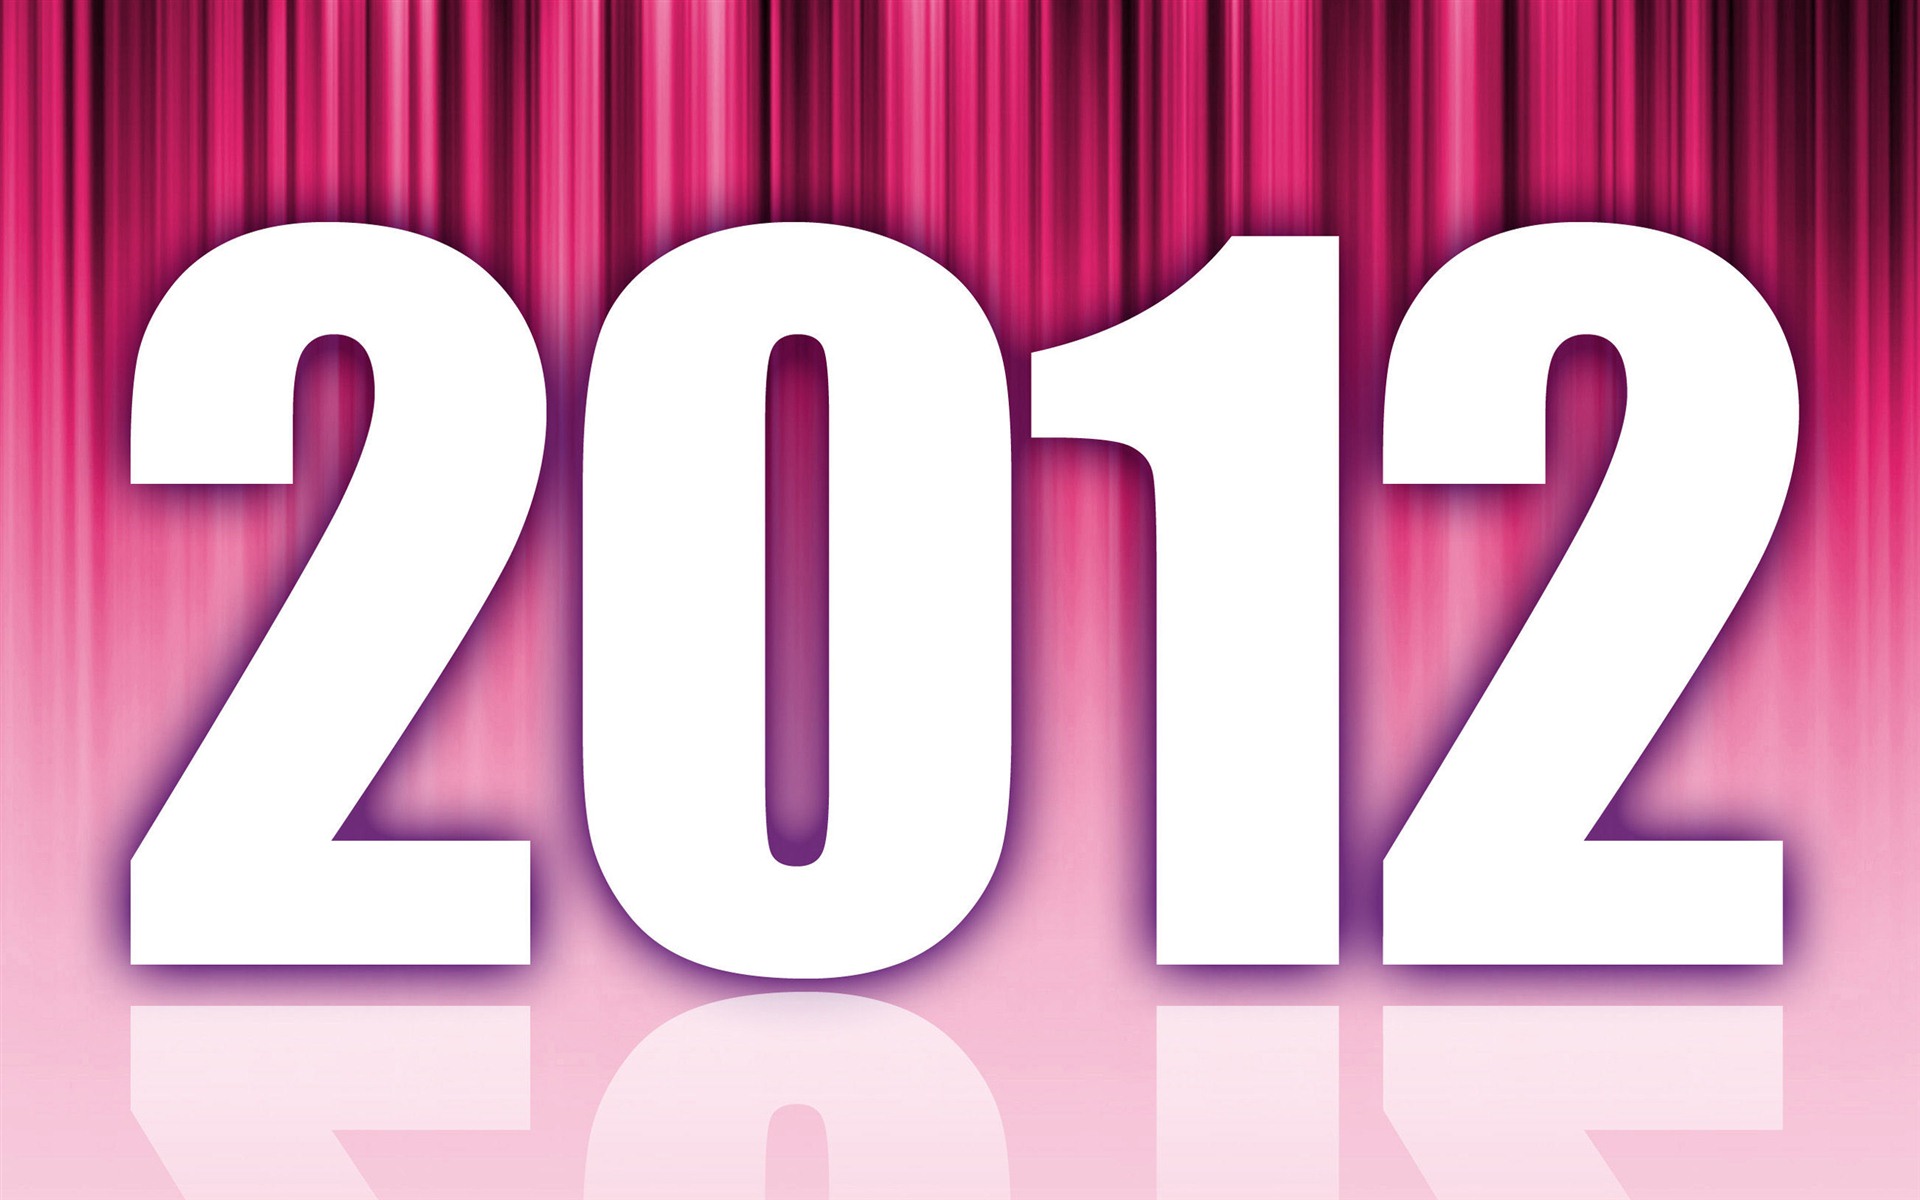 2012 New Year wallpapers (1) #5 - 1920x1200